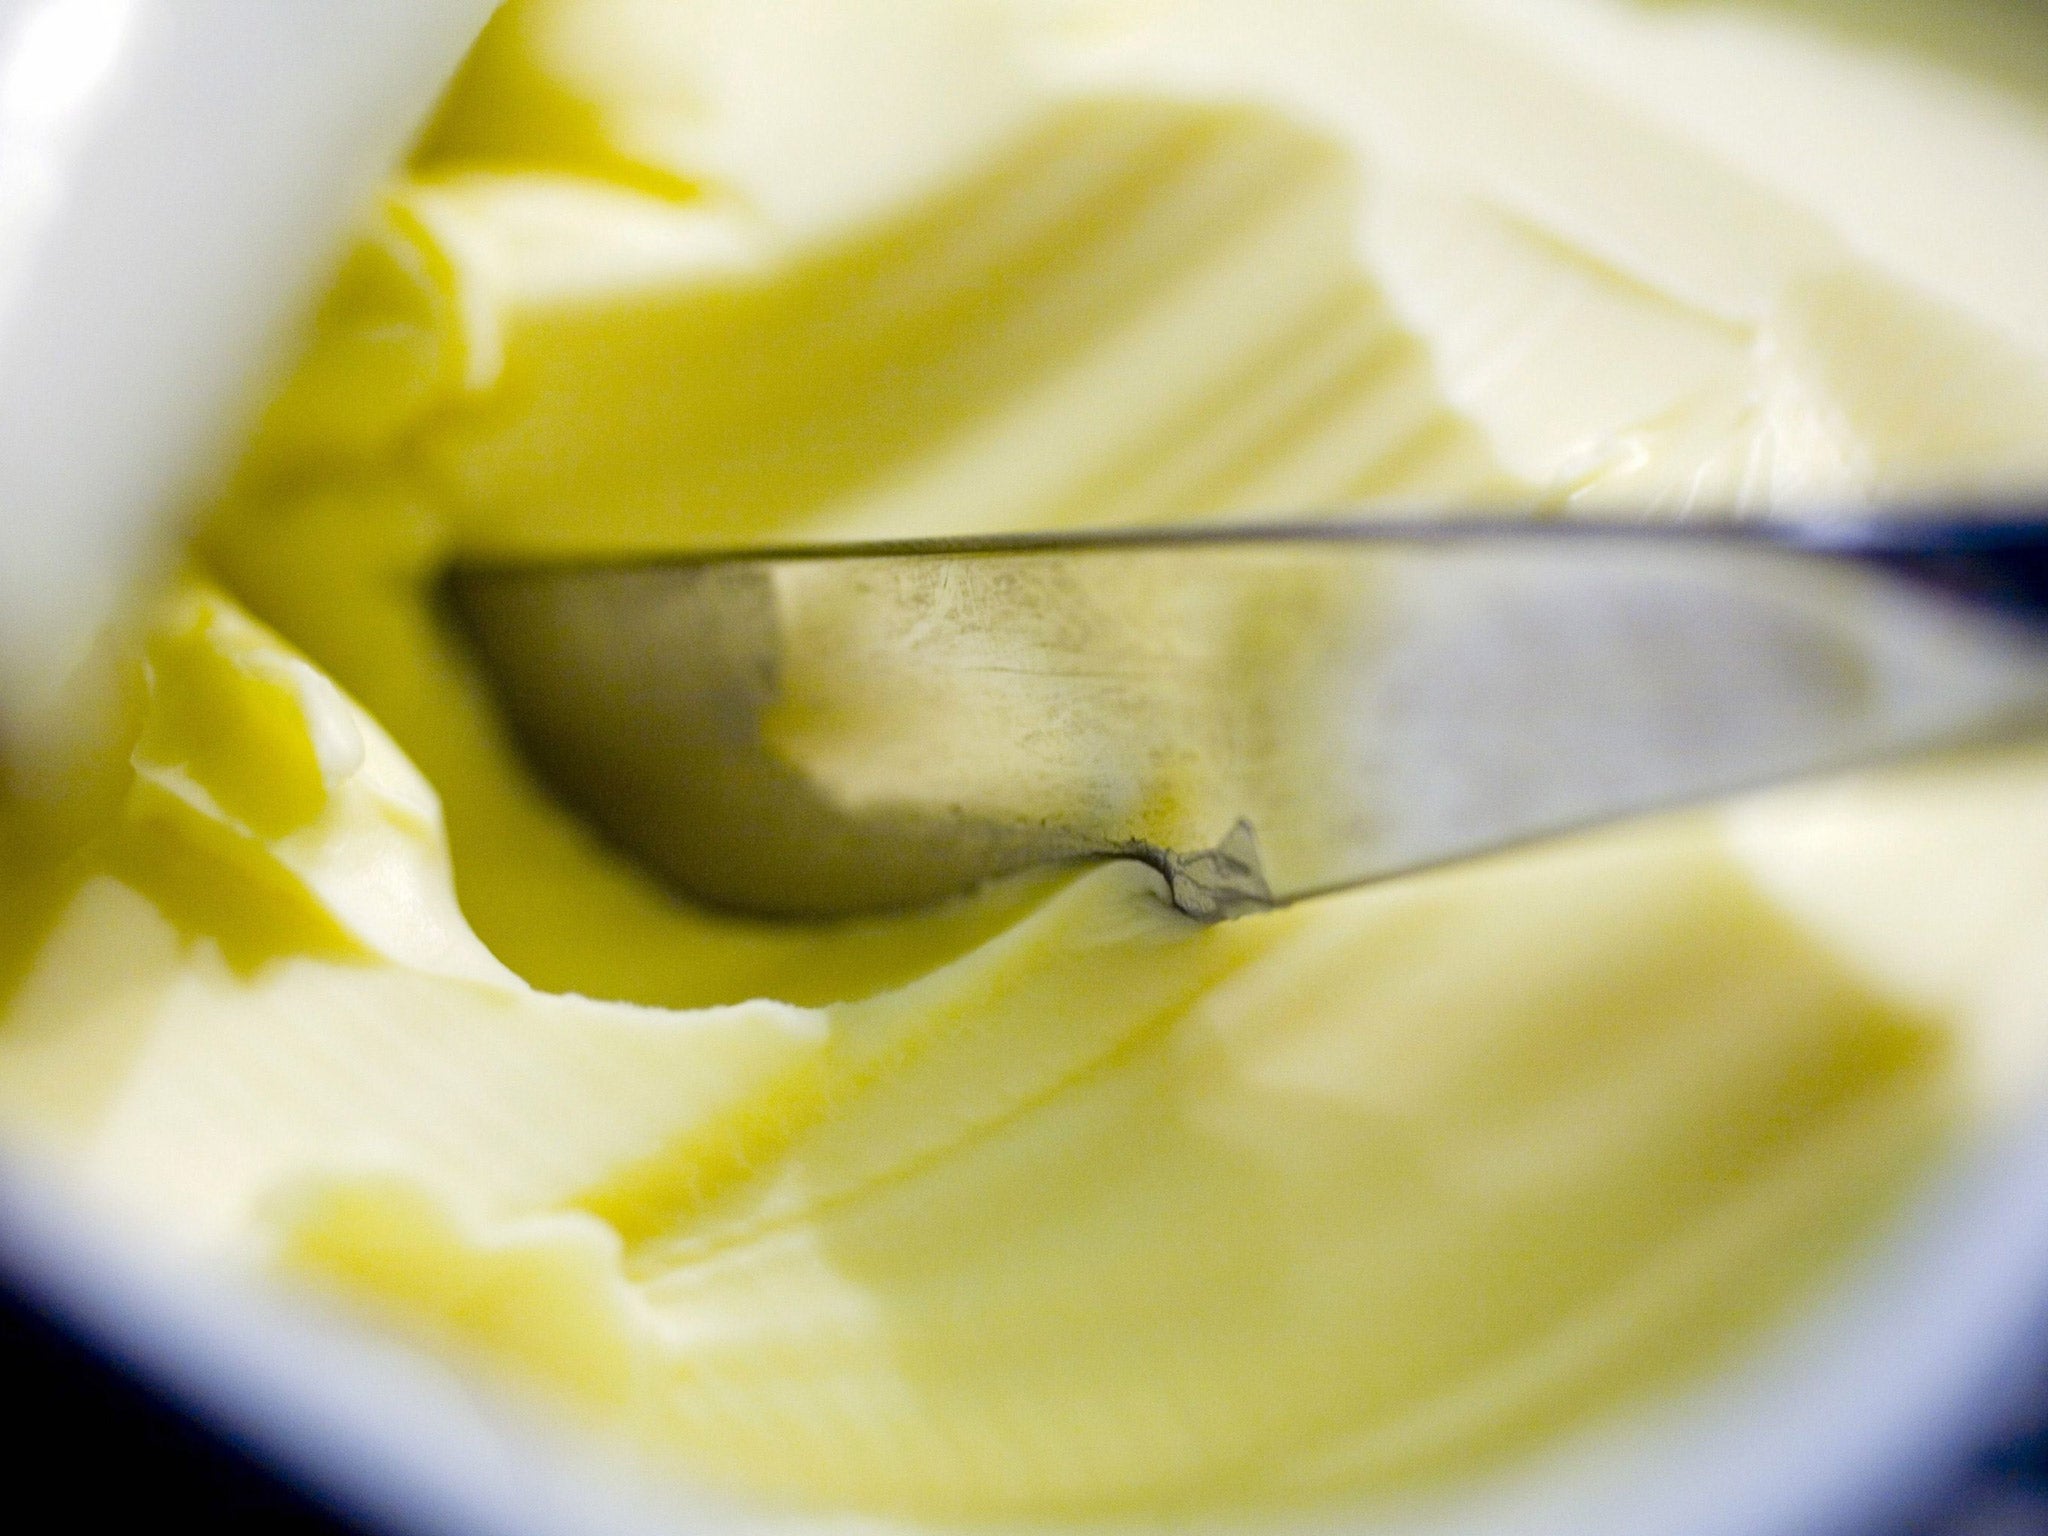 Butter is made by churning fresh cream or milk whereas margarine is made of vegetable fats